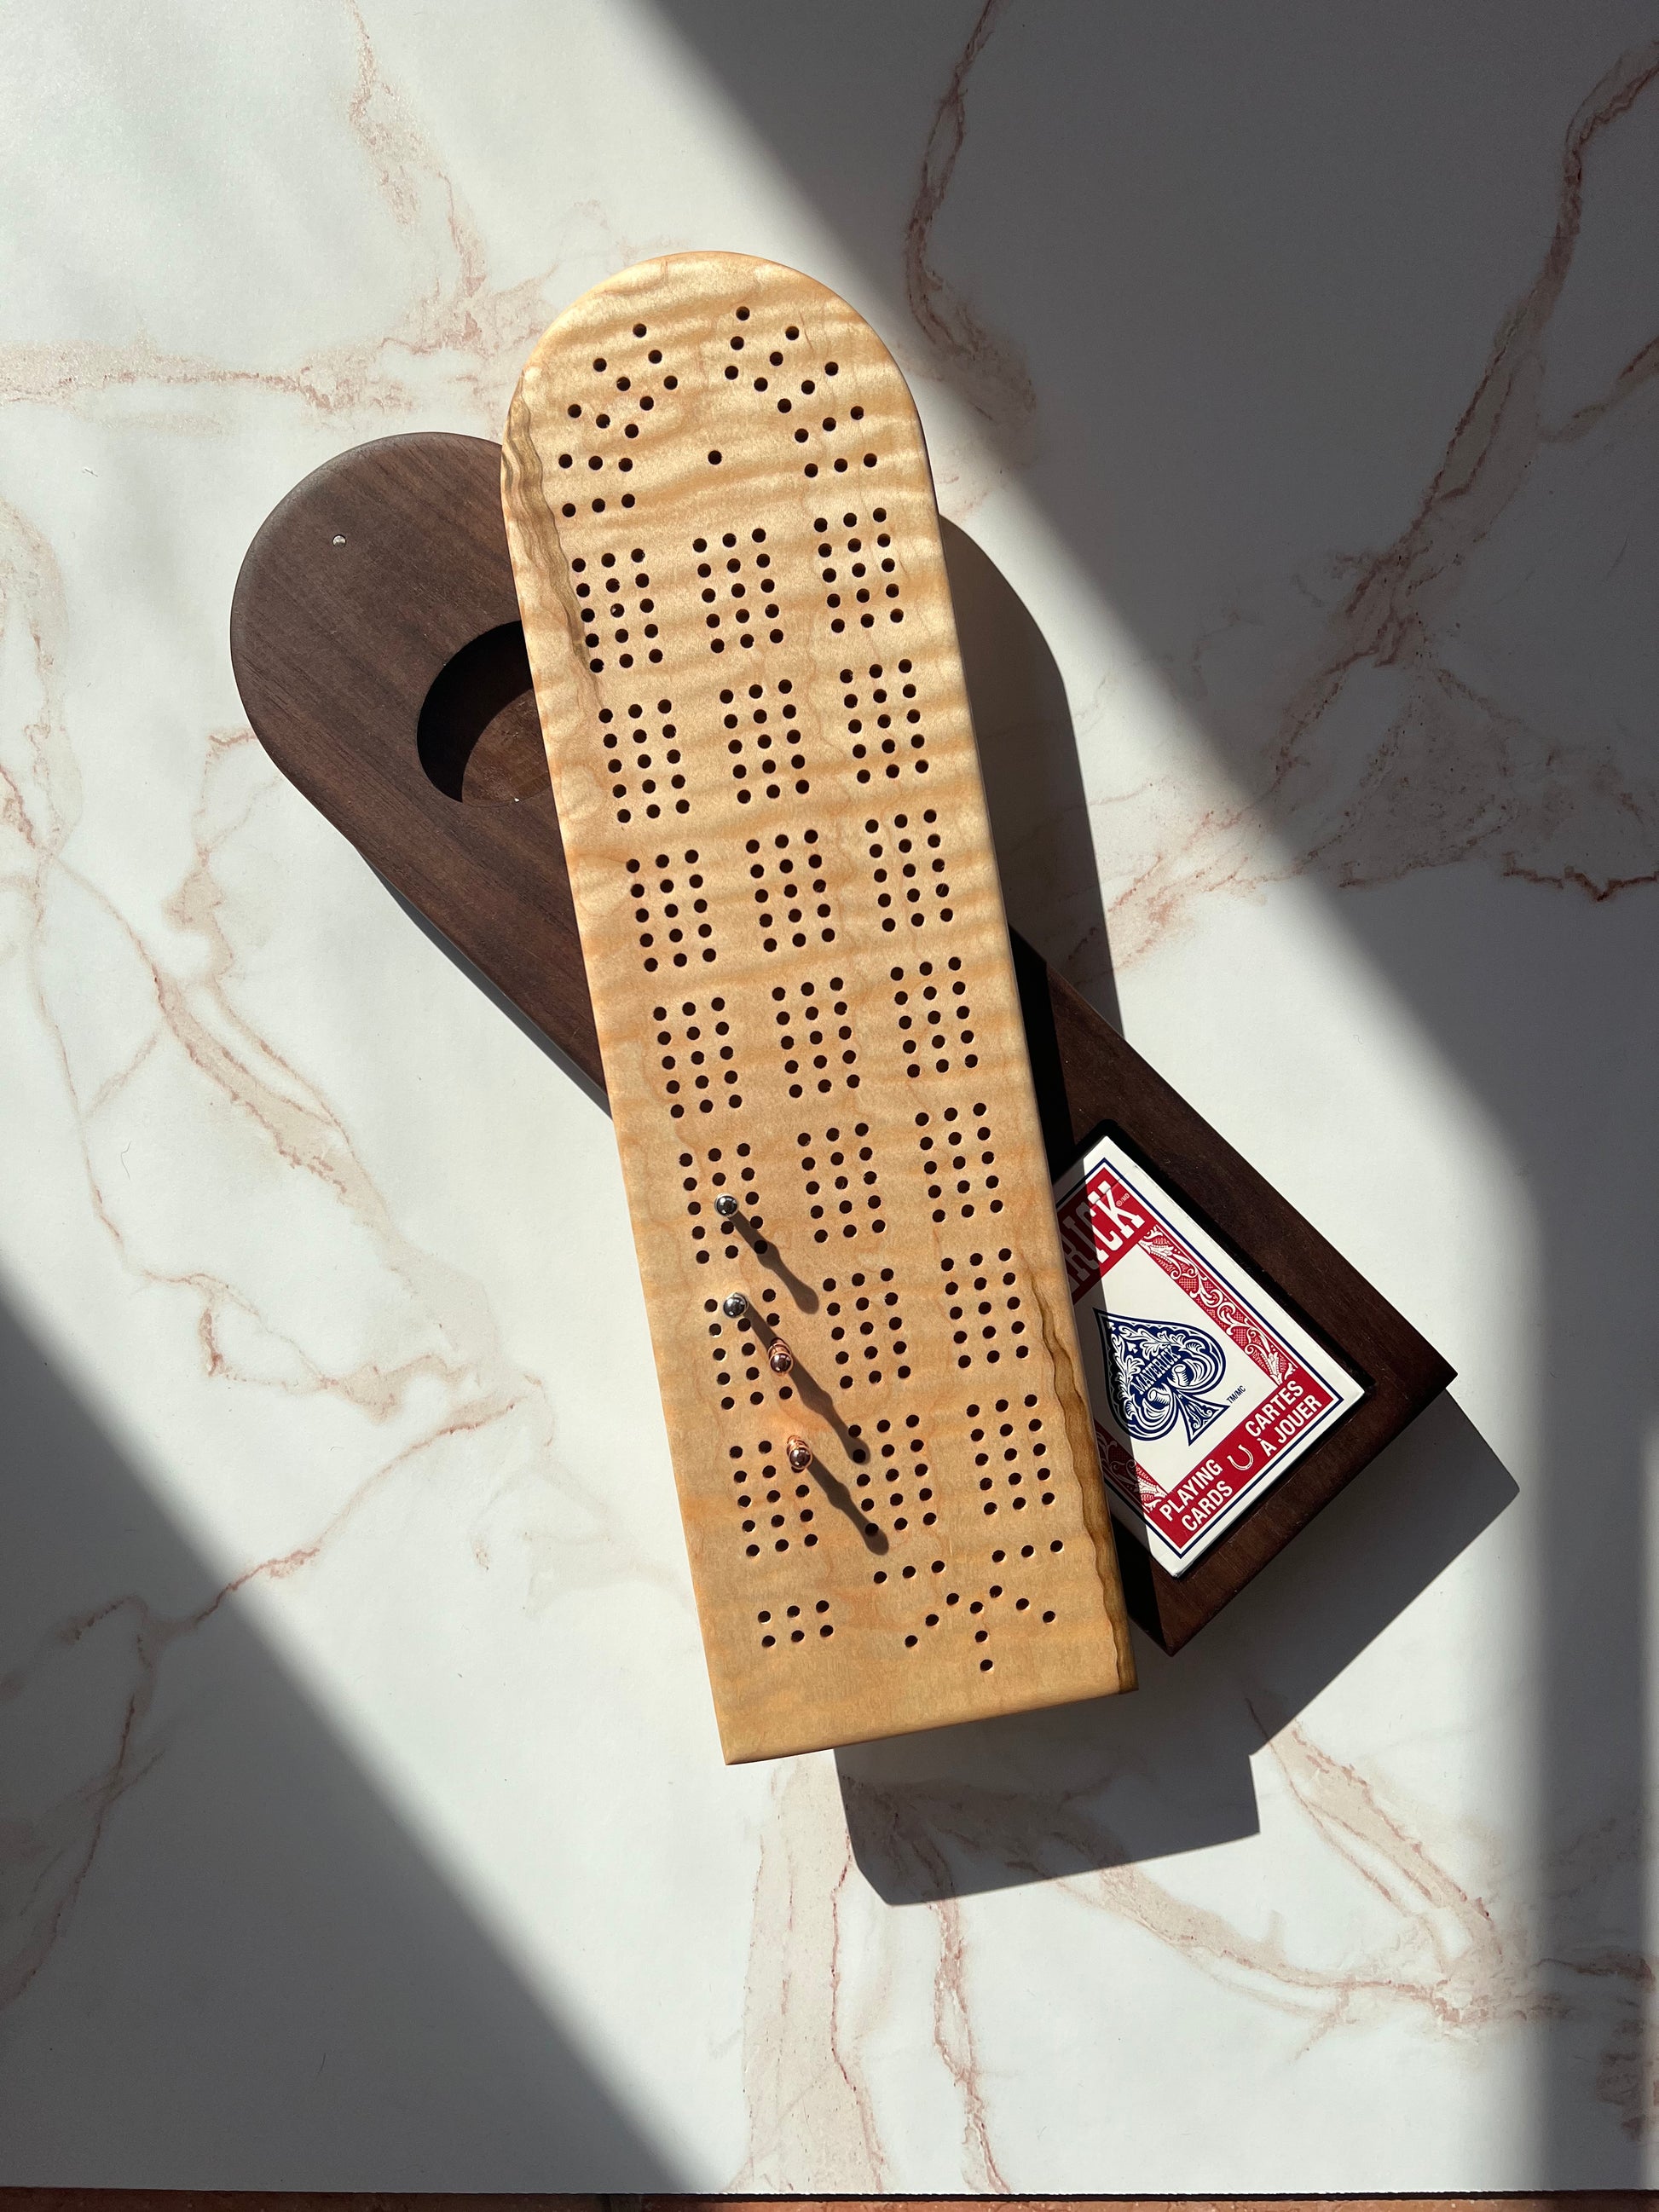 Stunning, handmade wooden cribbage board, light natural wood on top and a swivel card and peg storage with dark wood on the bottom